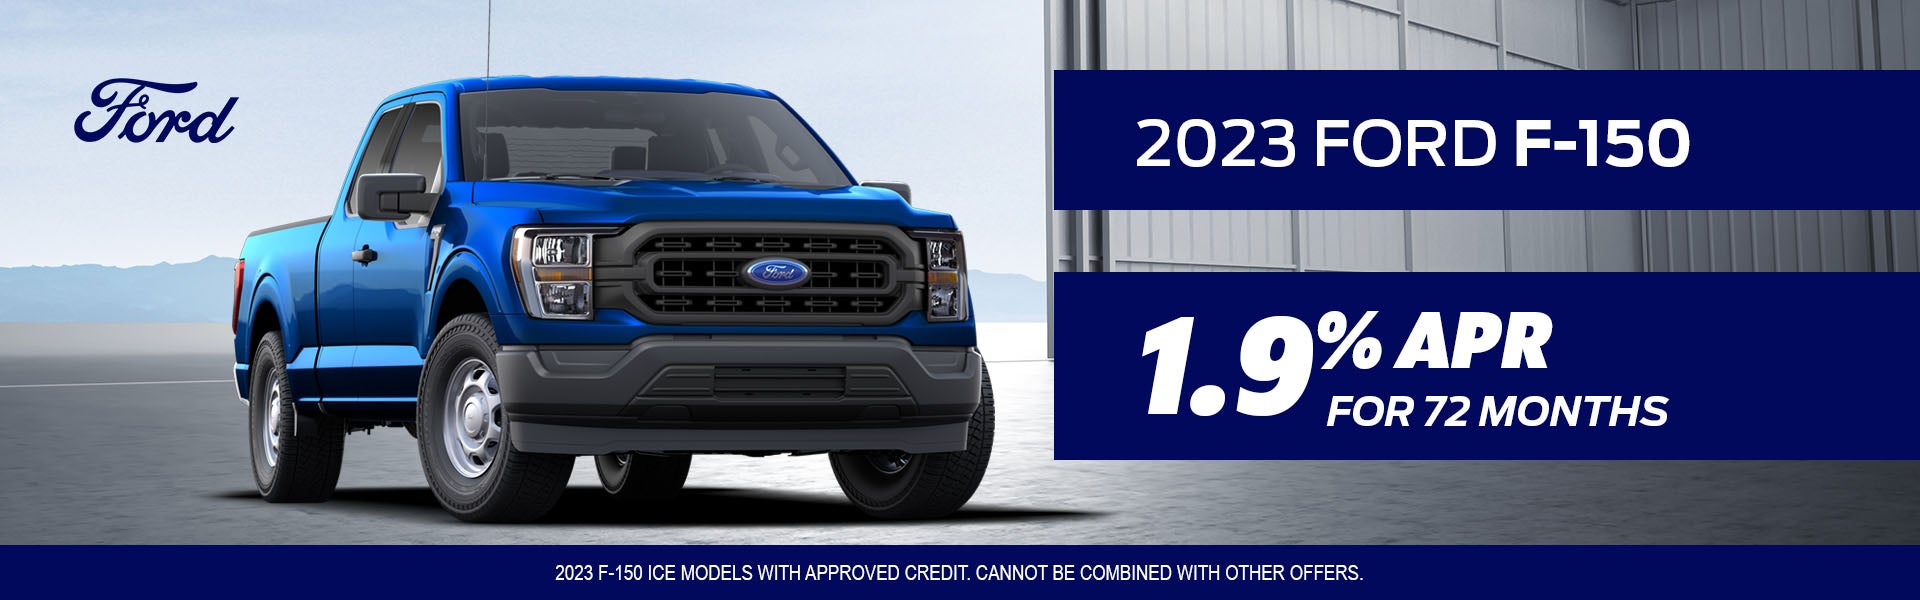 2023 F-150 1.9% APR for 72 Months